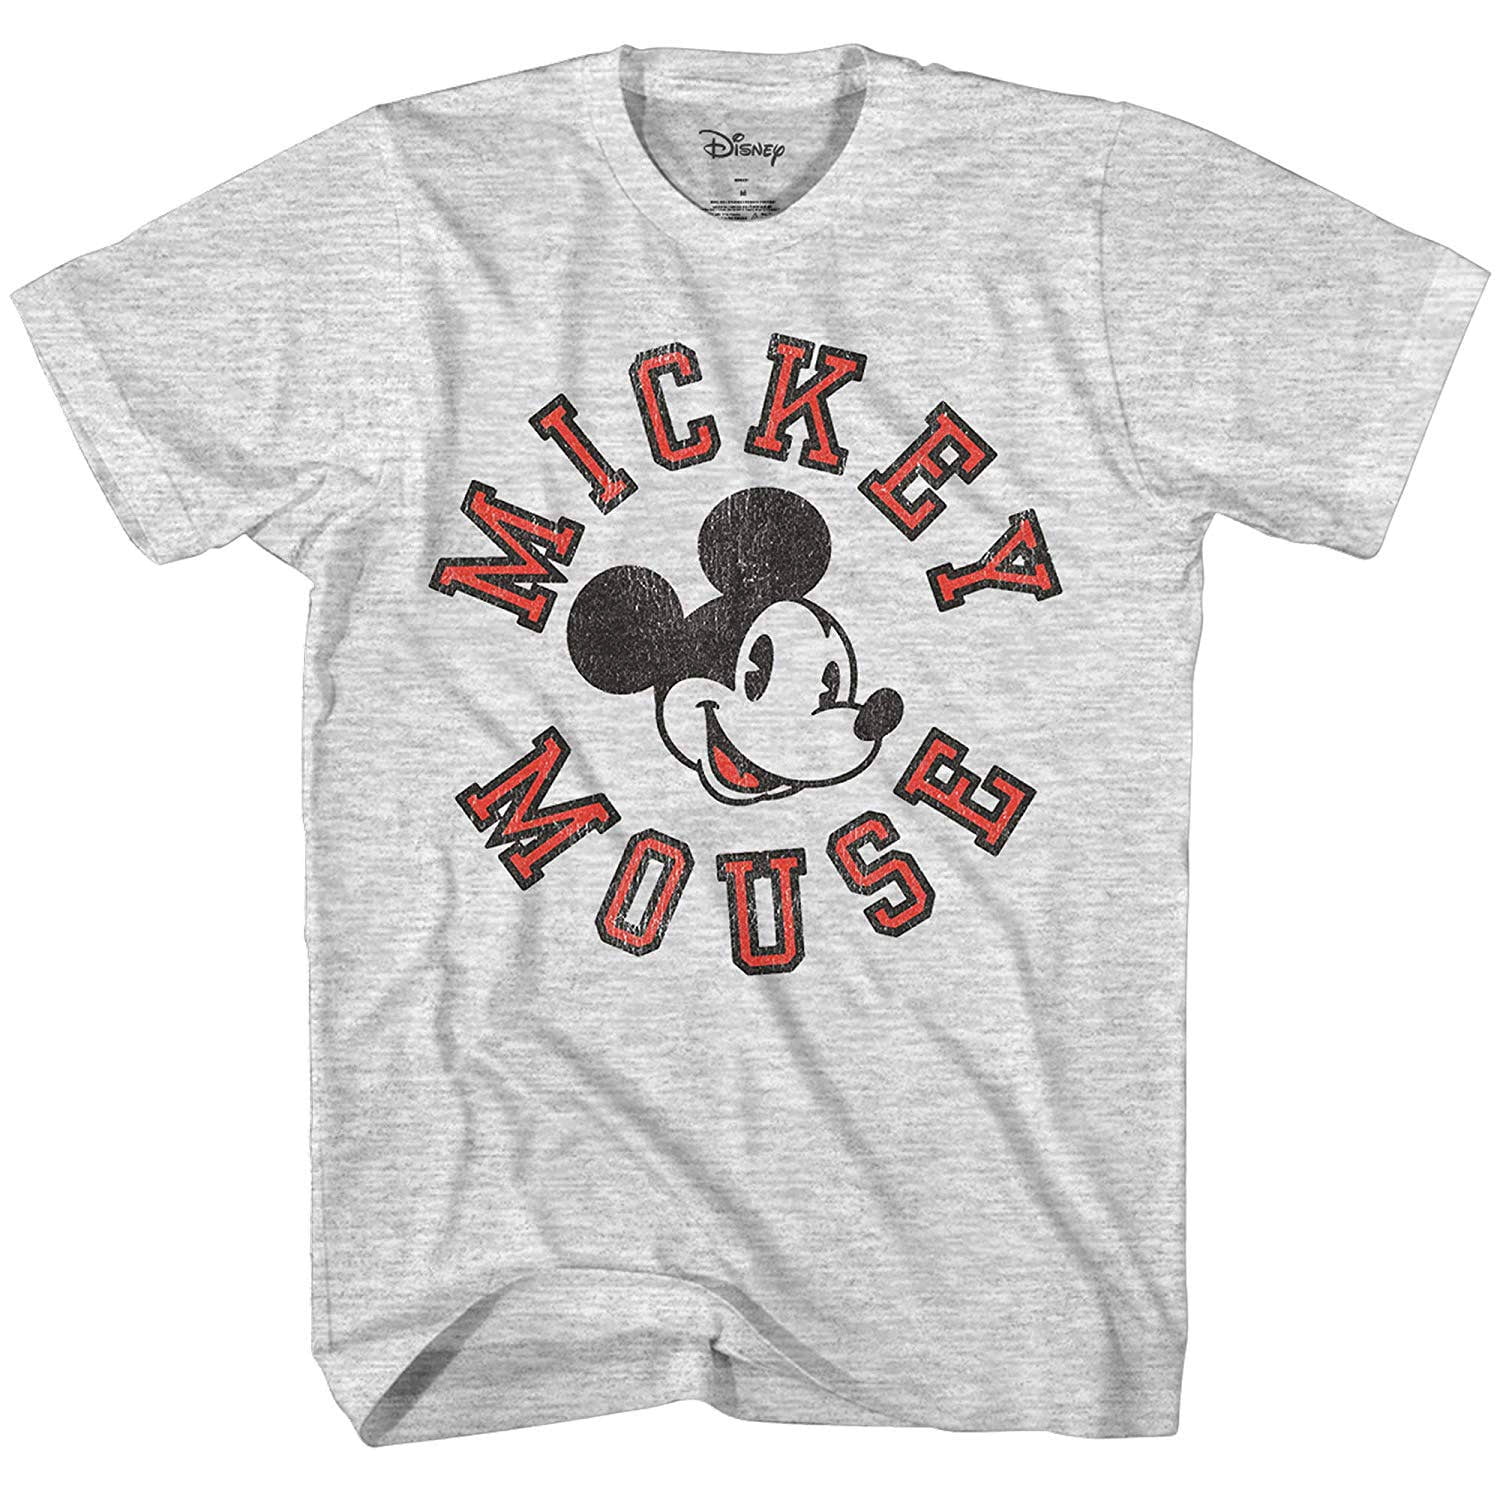 Disney Men's Mickey Mouse Athletic Vintage Classic Distressed Adult T ...